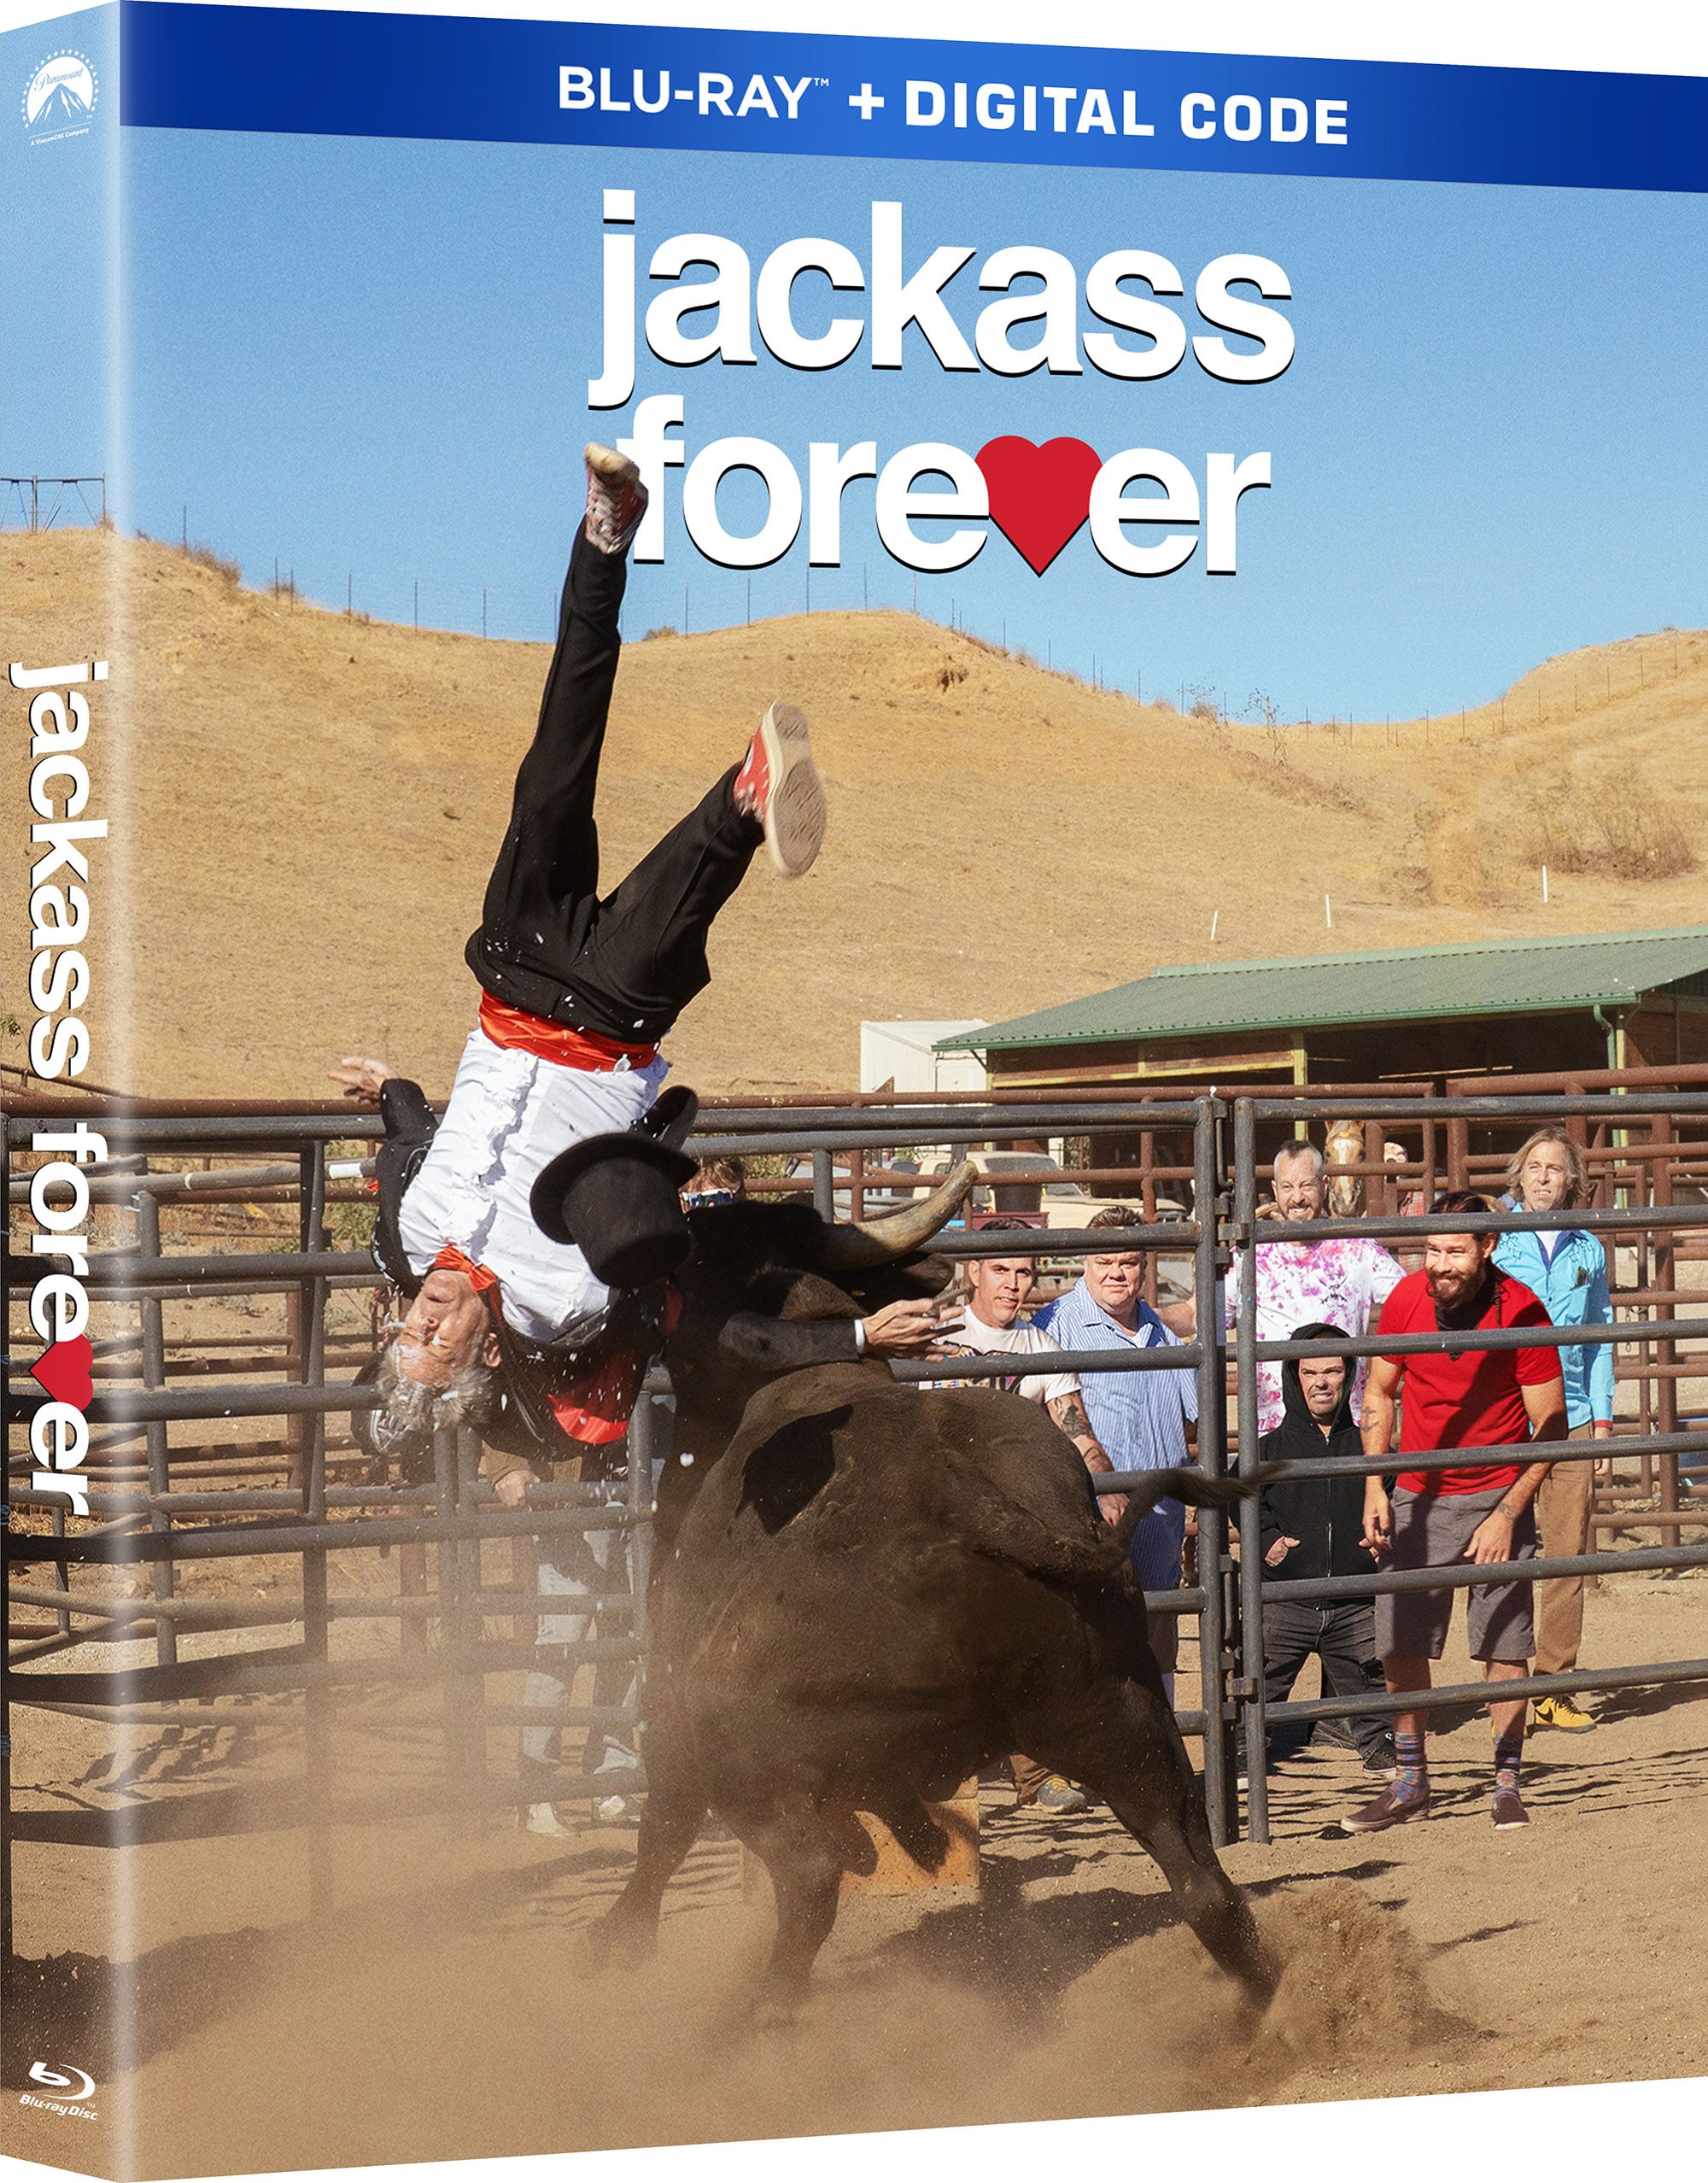 Jackass Forever Blu ray Cover